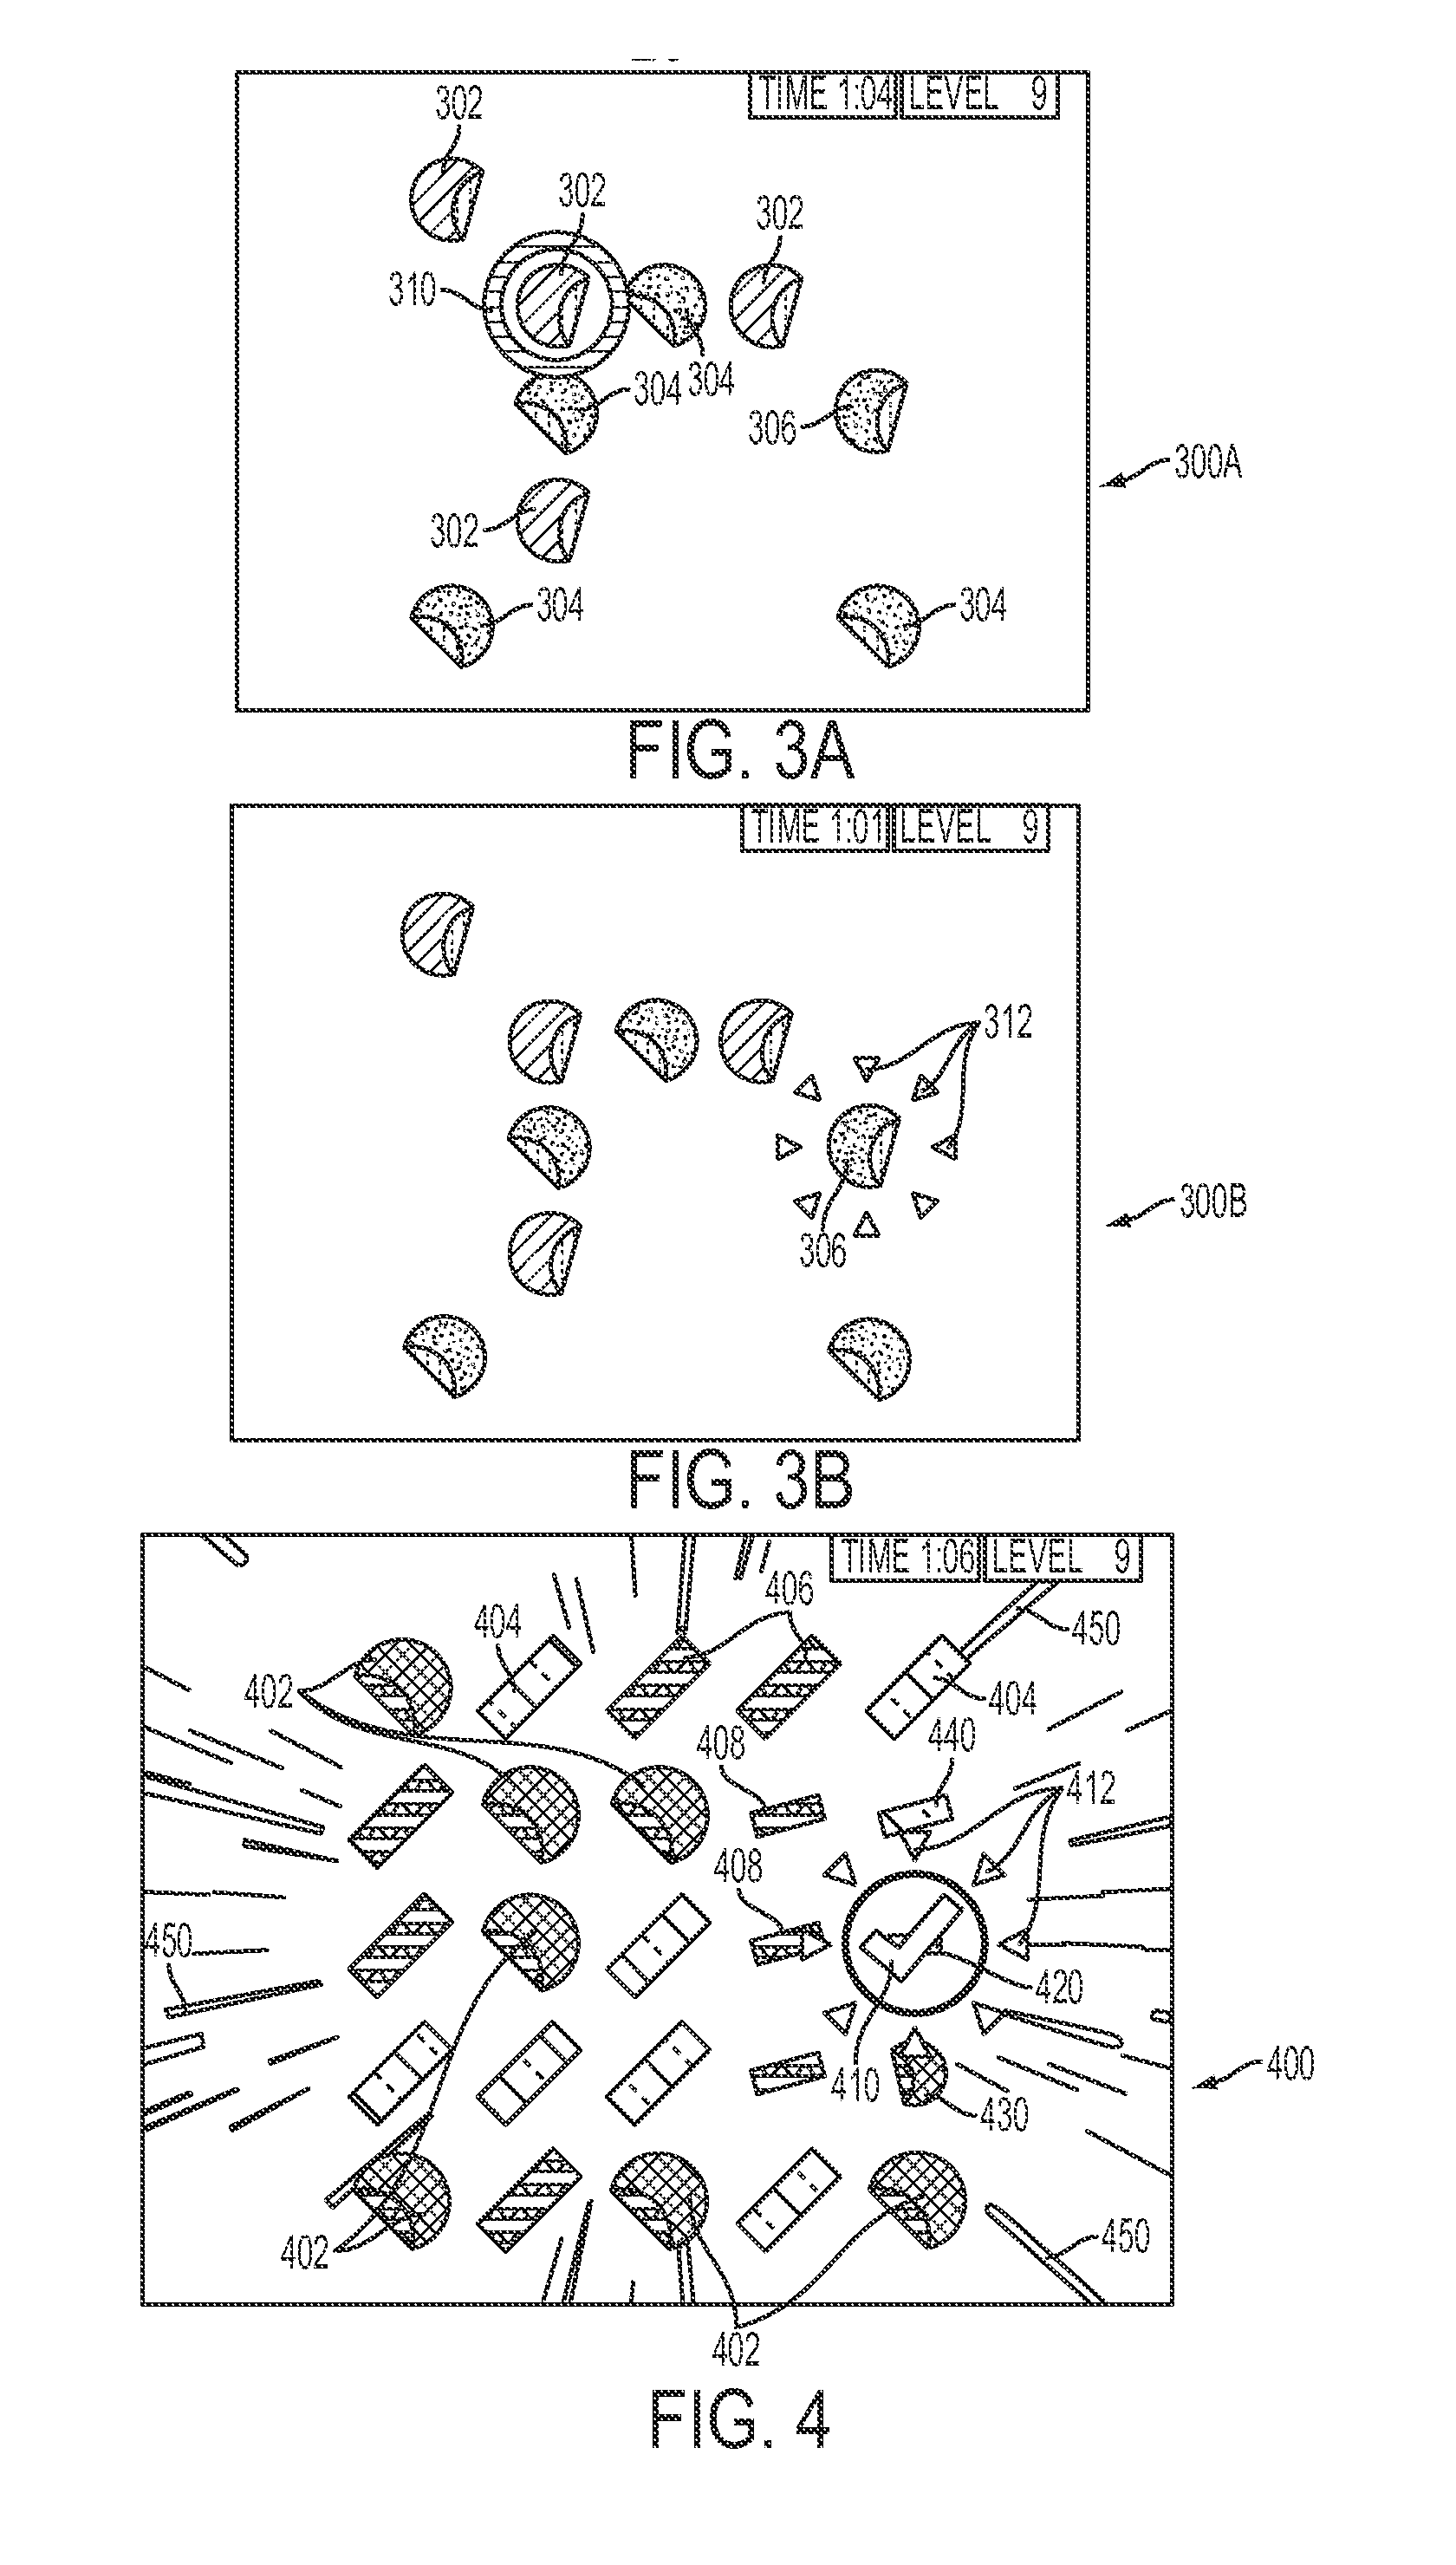 Systems and methods for a search driven, visual attention task for enhancing cognition